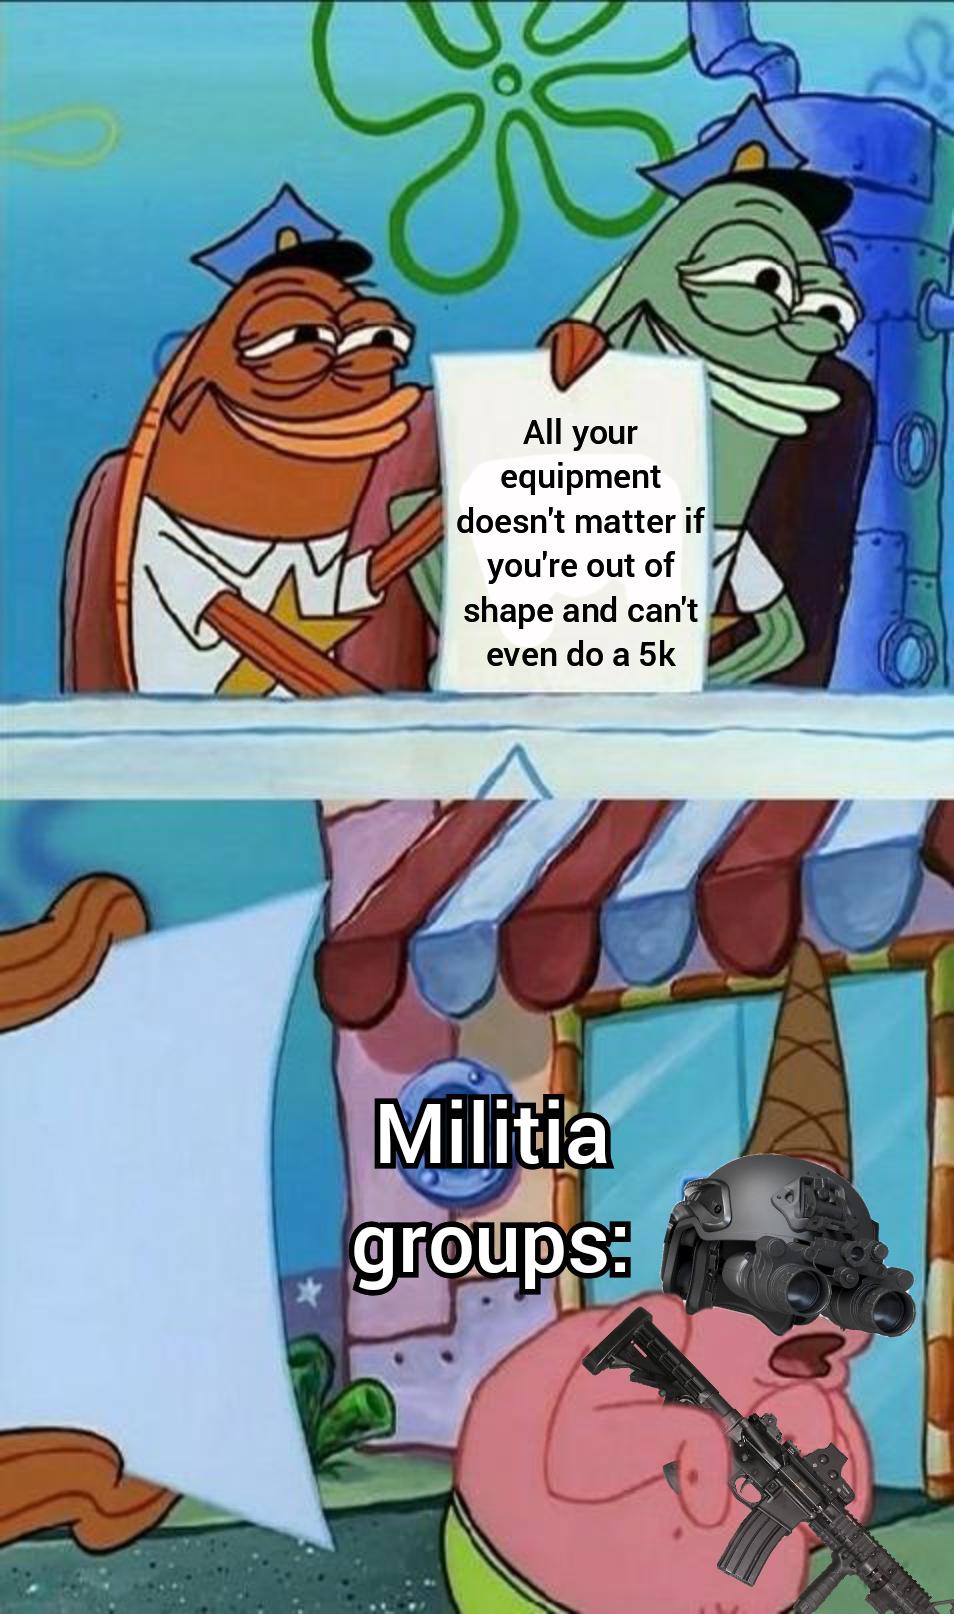 scared patrick meme - All your equipment doesn't matter if you're out of shape and can't even do a 5k Militia groups